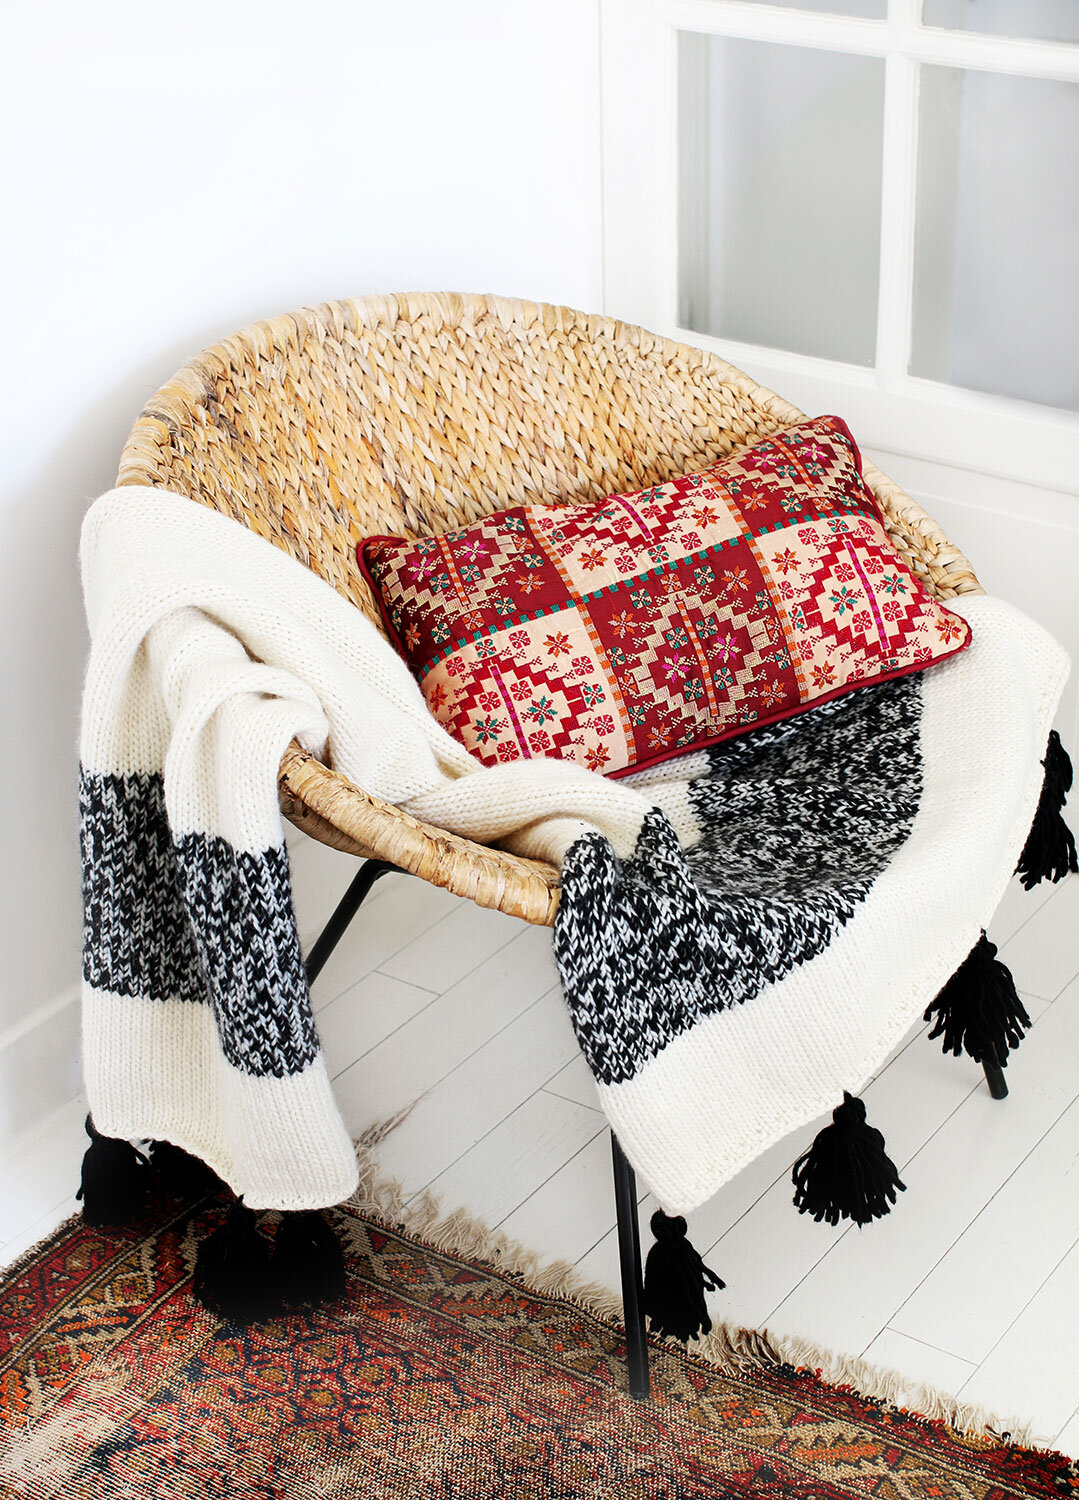 knit your own kilim blanket